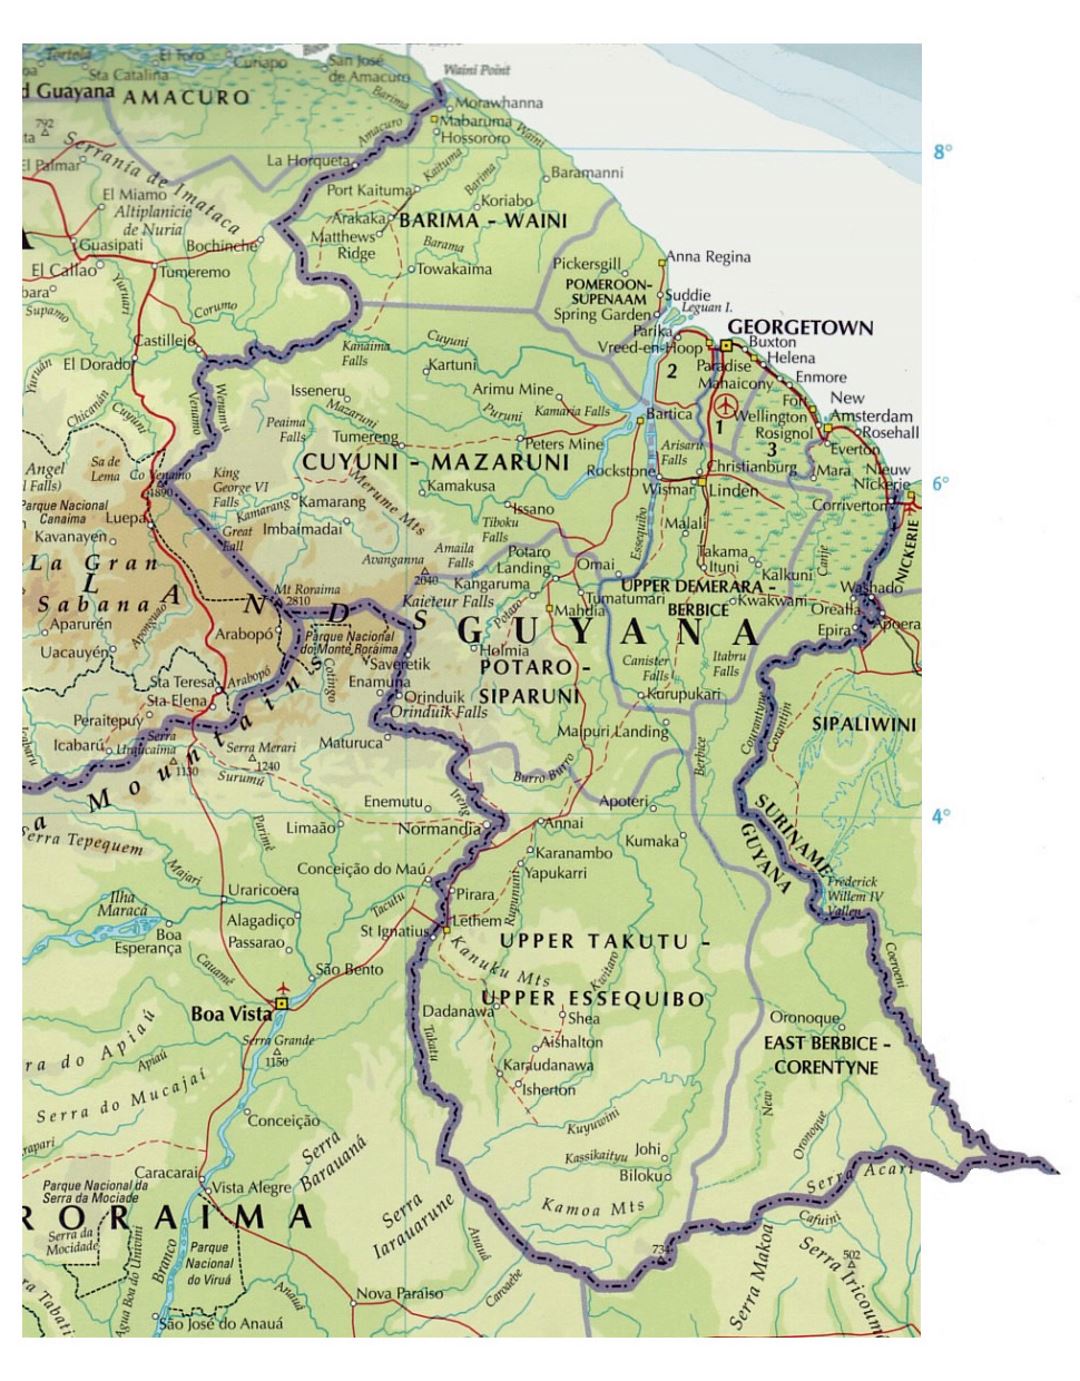 Detailed map of Guyana with roads and cities